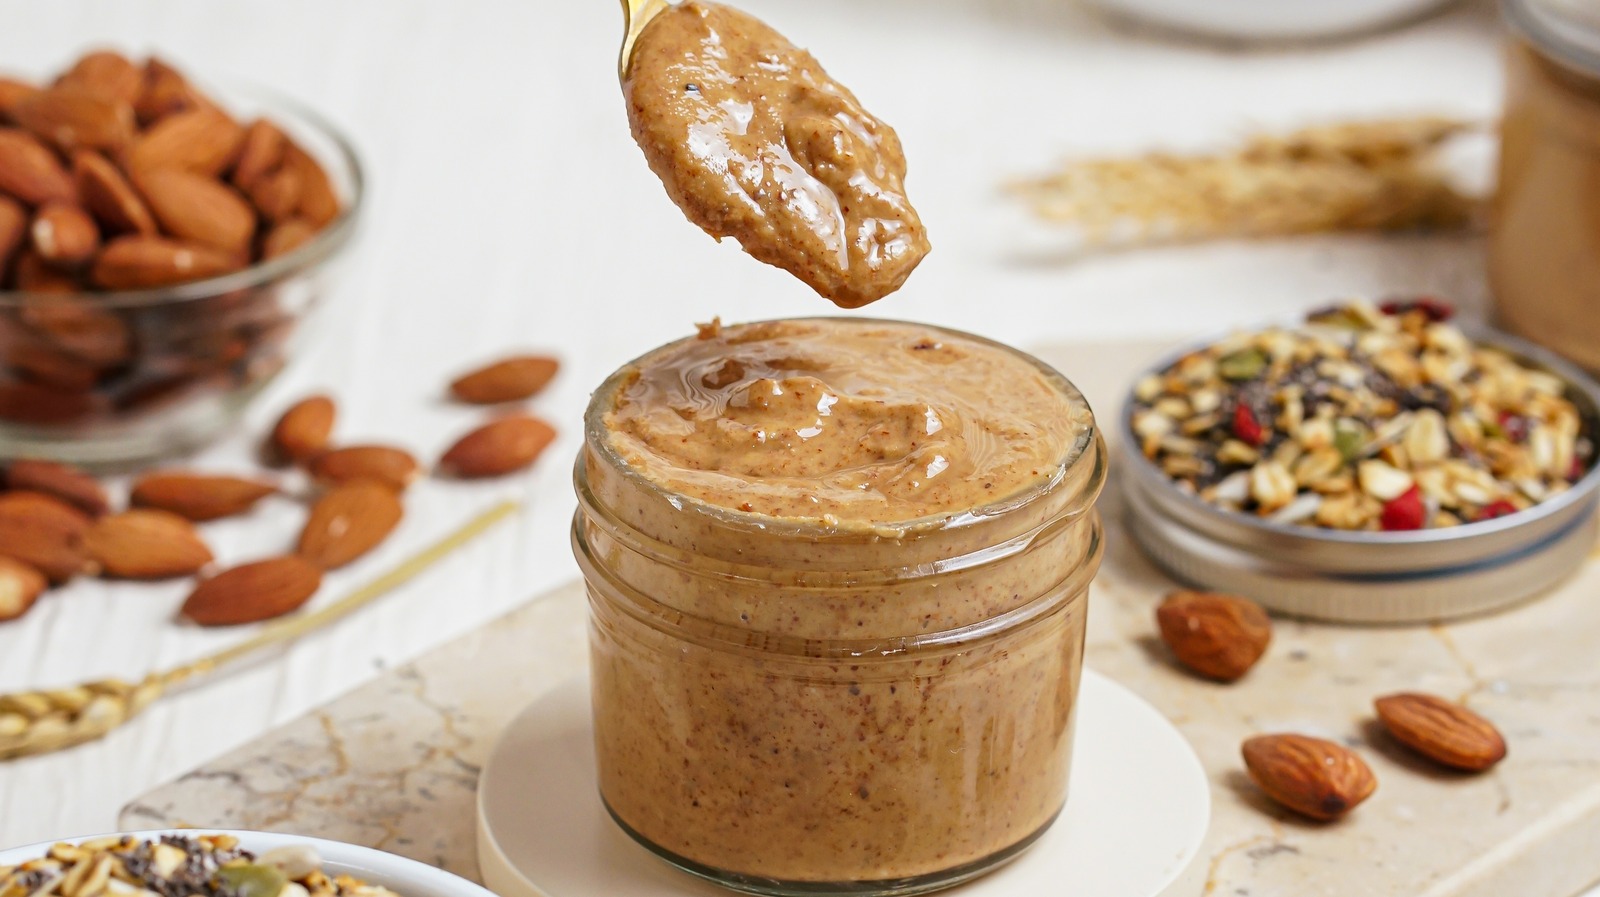 Eco-novice: Hate Stirring Natural Nut Butters? Read This.